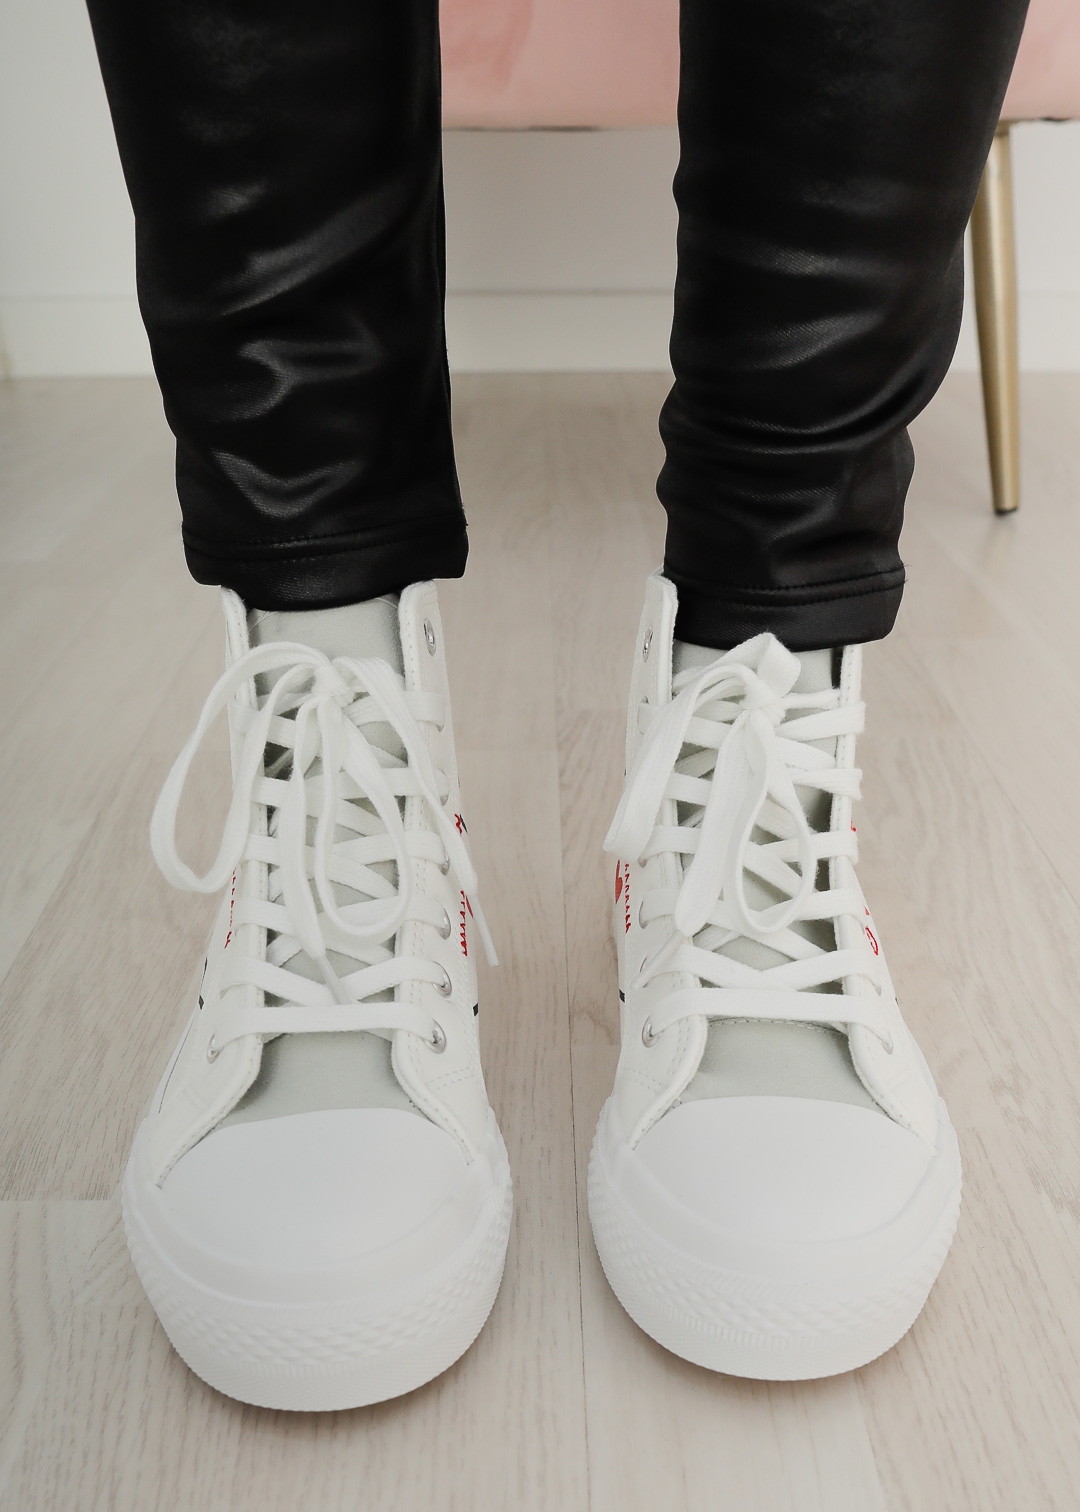 WHITE SNEAKERS WITH BLACK HEARTS